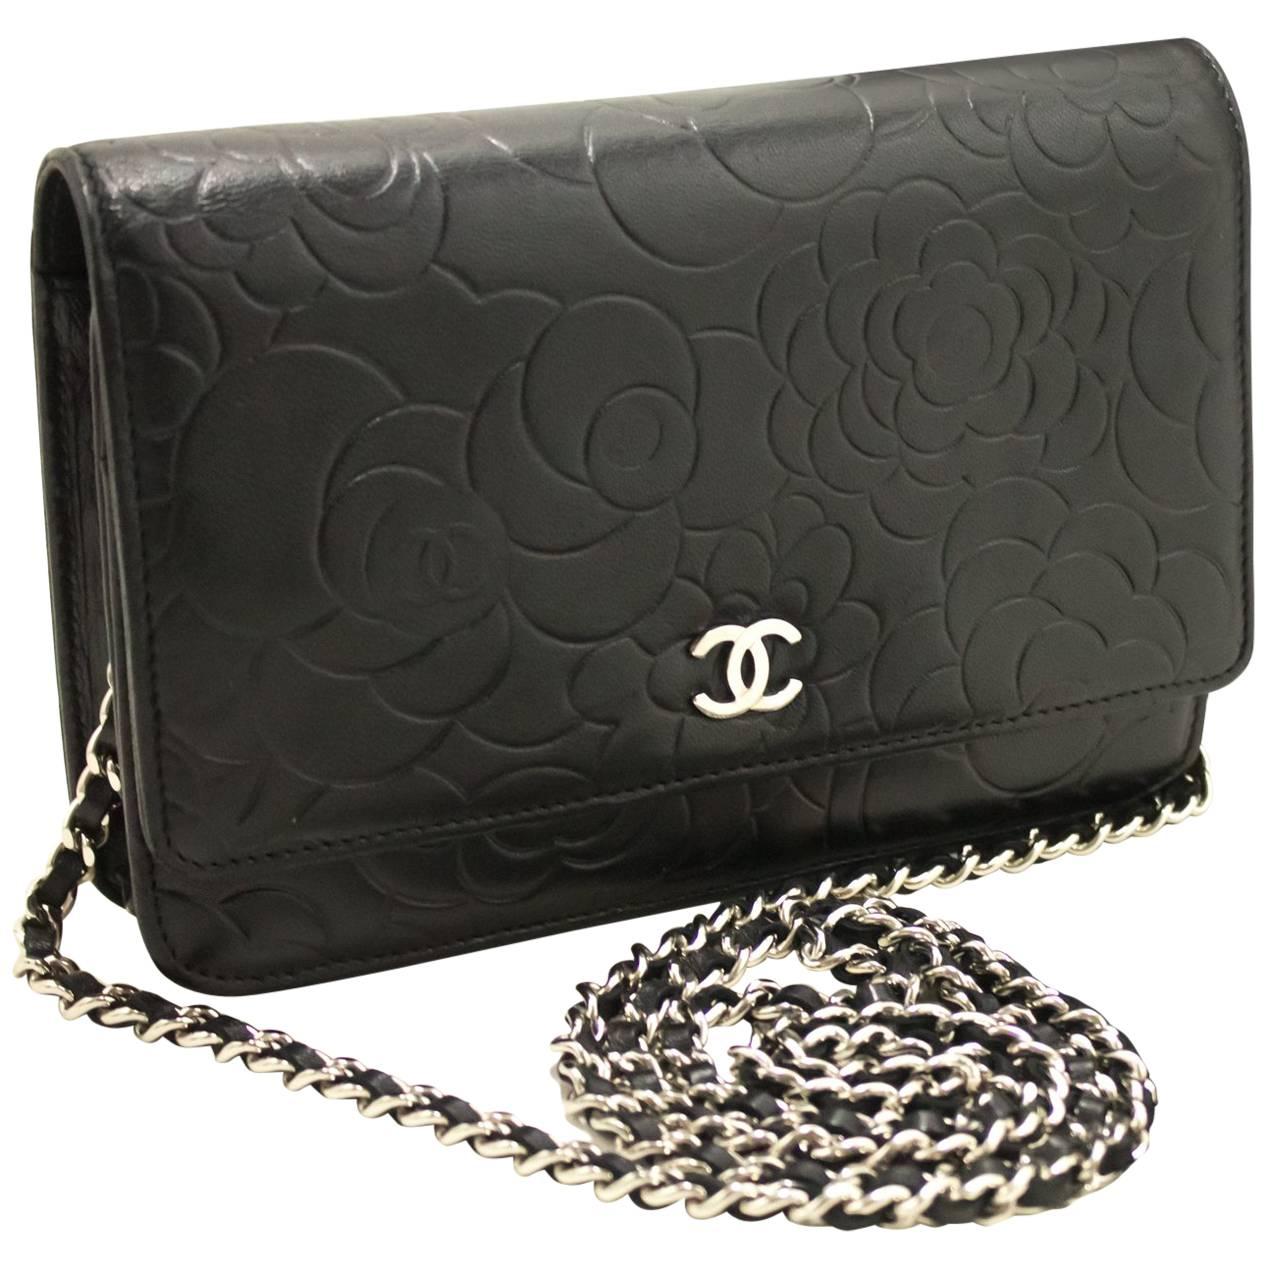 Chanel Black Lambskin Leather Camellia Embossed WOC (wallet-on-chain)  Clutch Bag